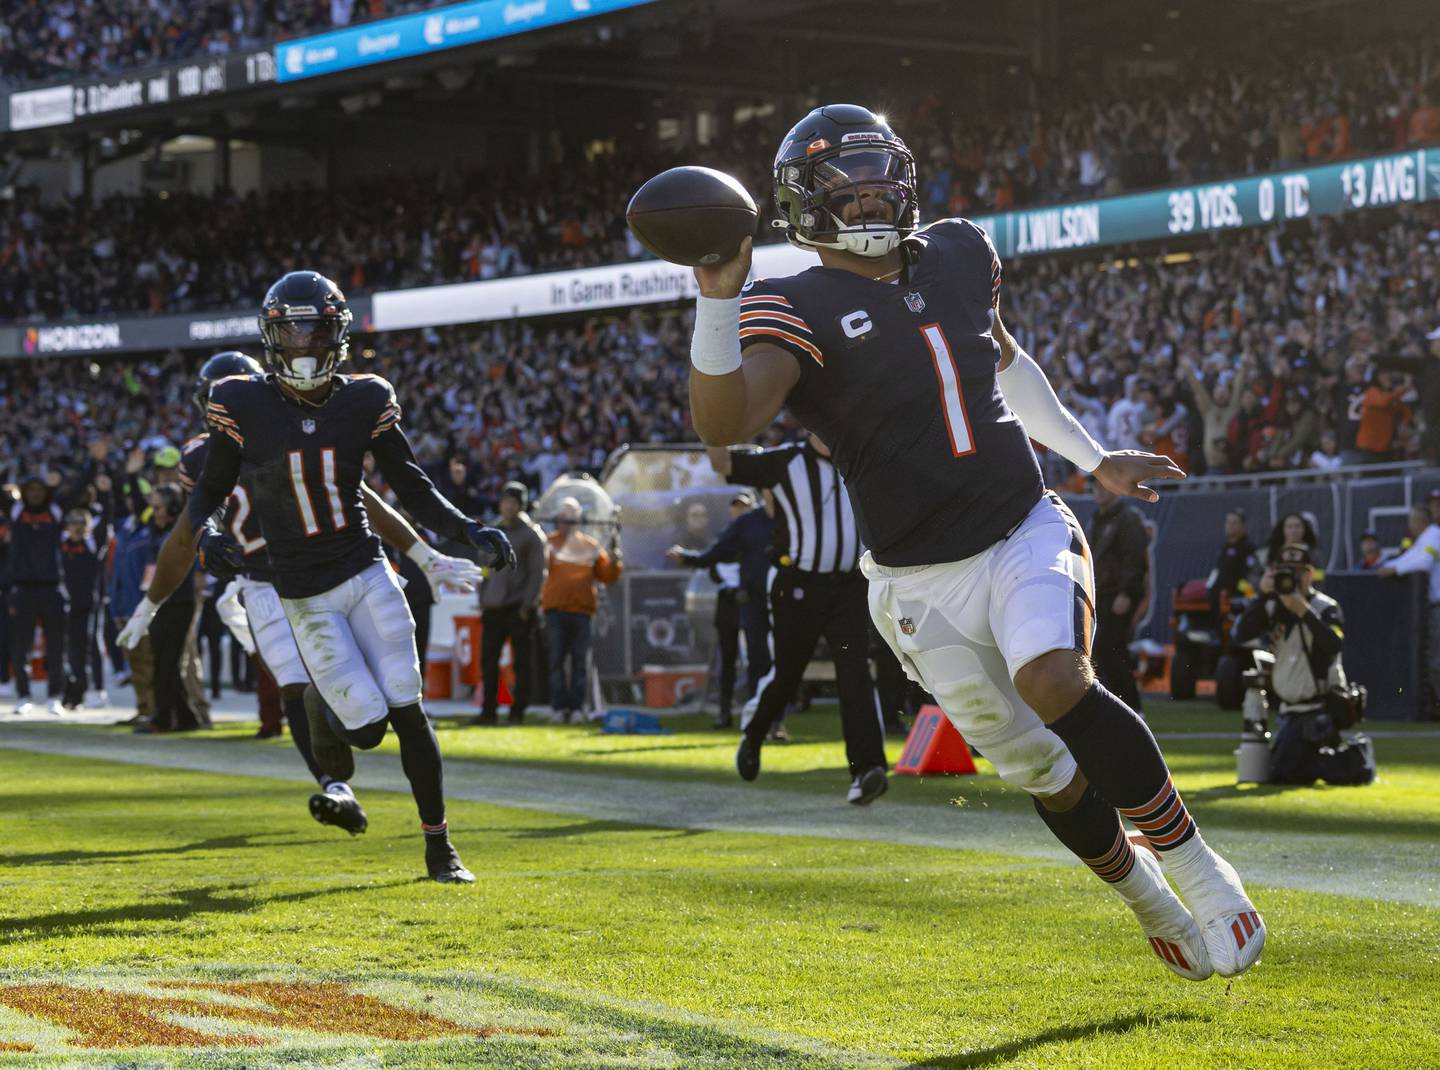 Bears quarterback Justin Fields runs for a 61-yard touchdown in the third quarter at Soldier Field on Nov. 6, 2022.